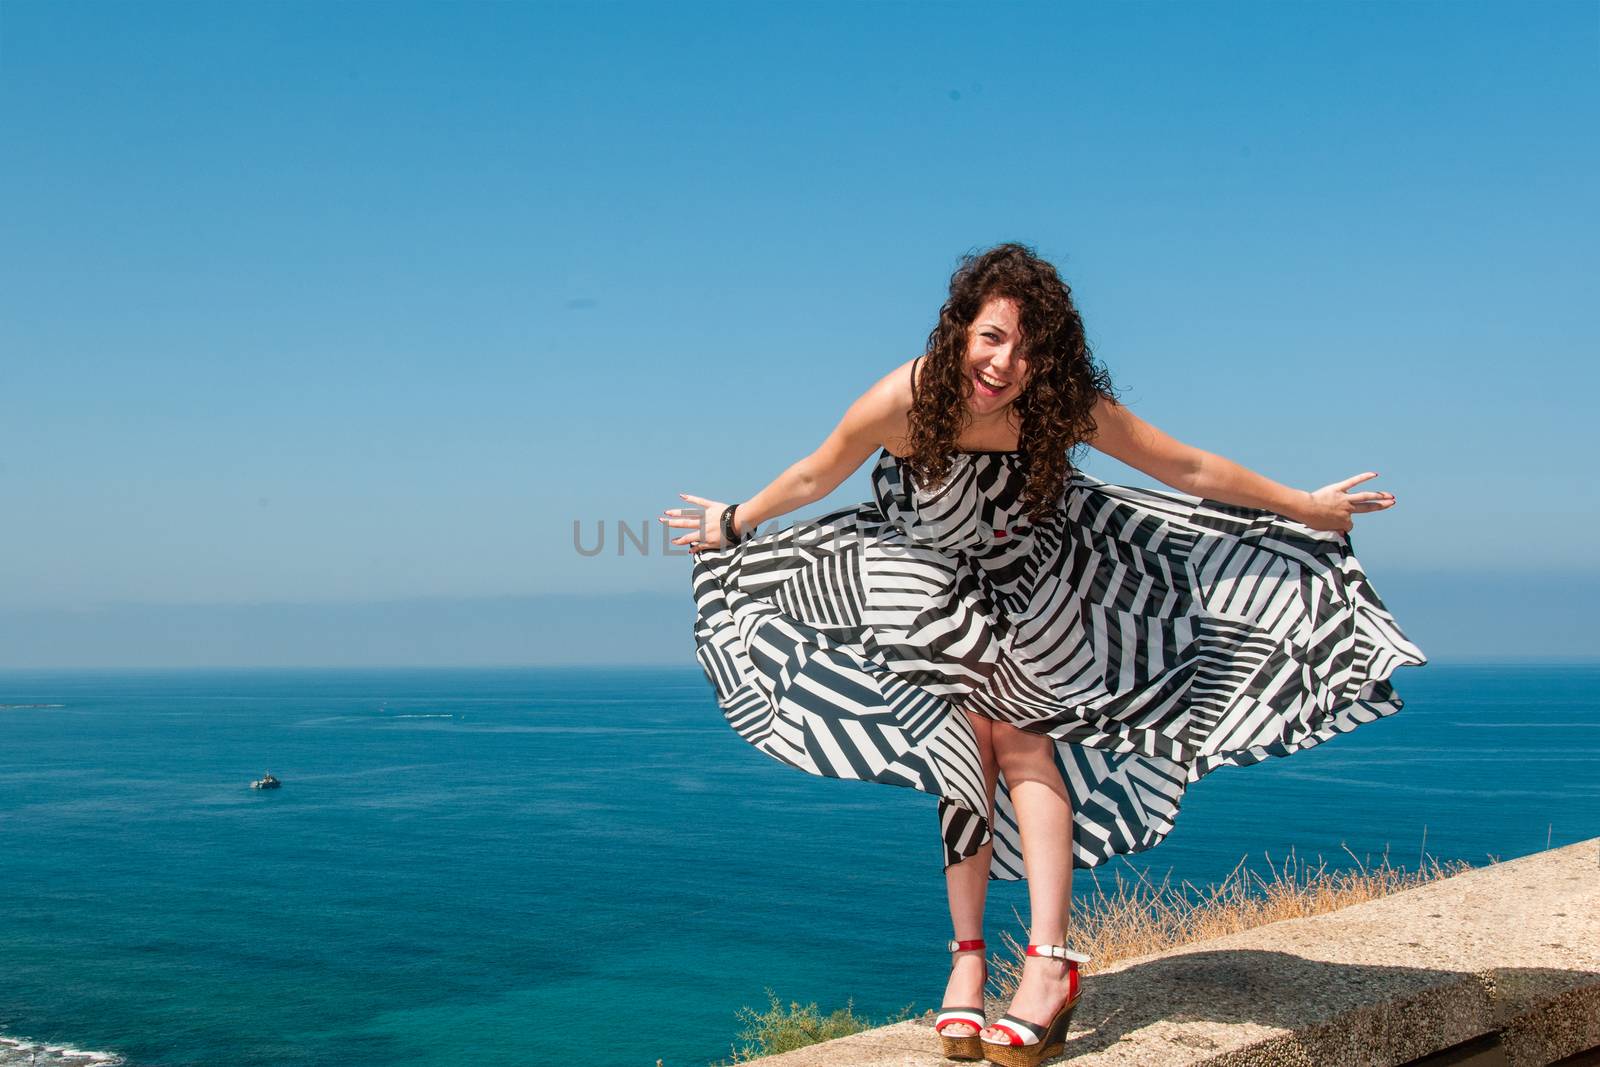 Portrait of a laughing girl in a light dress against the blue sea on a warm summer day